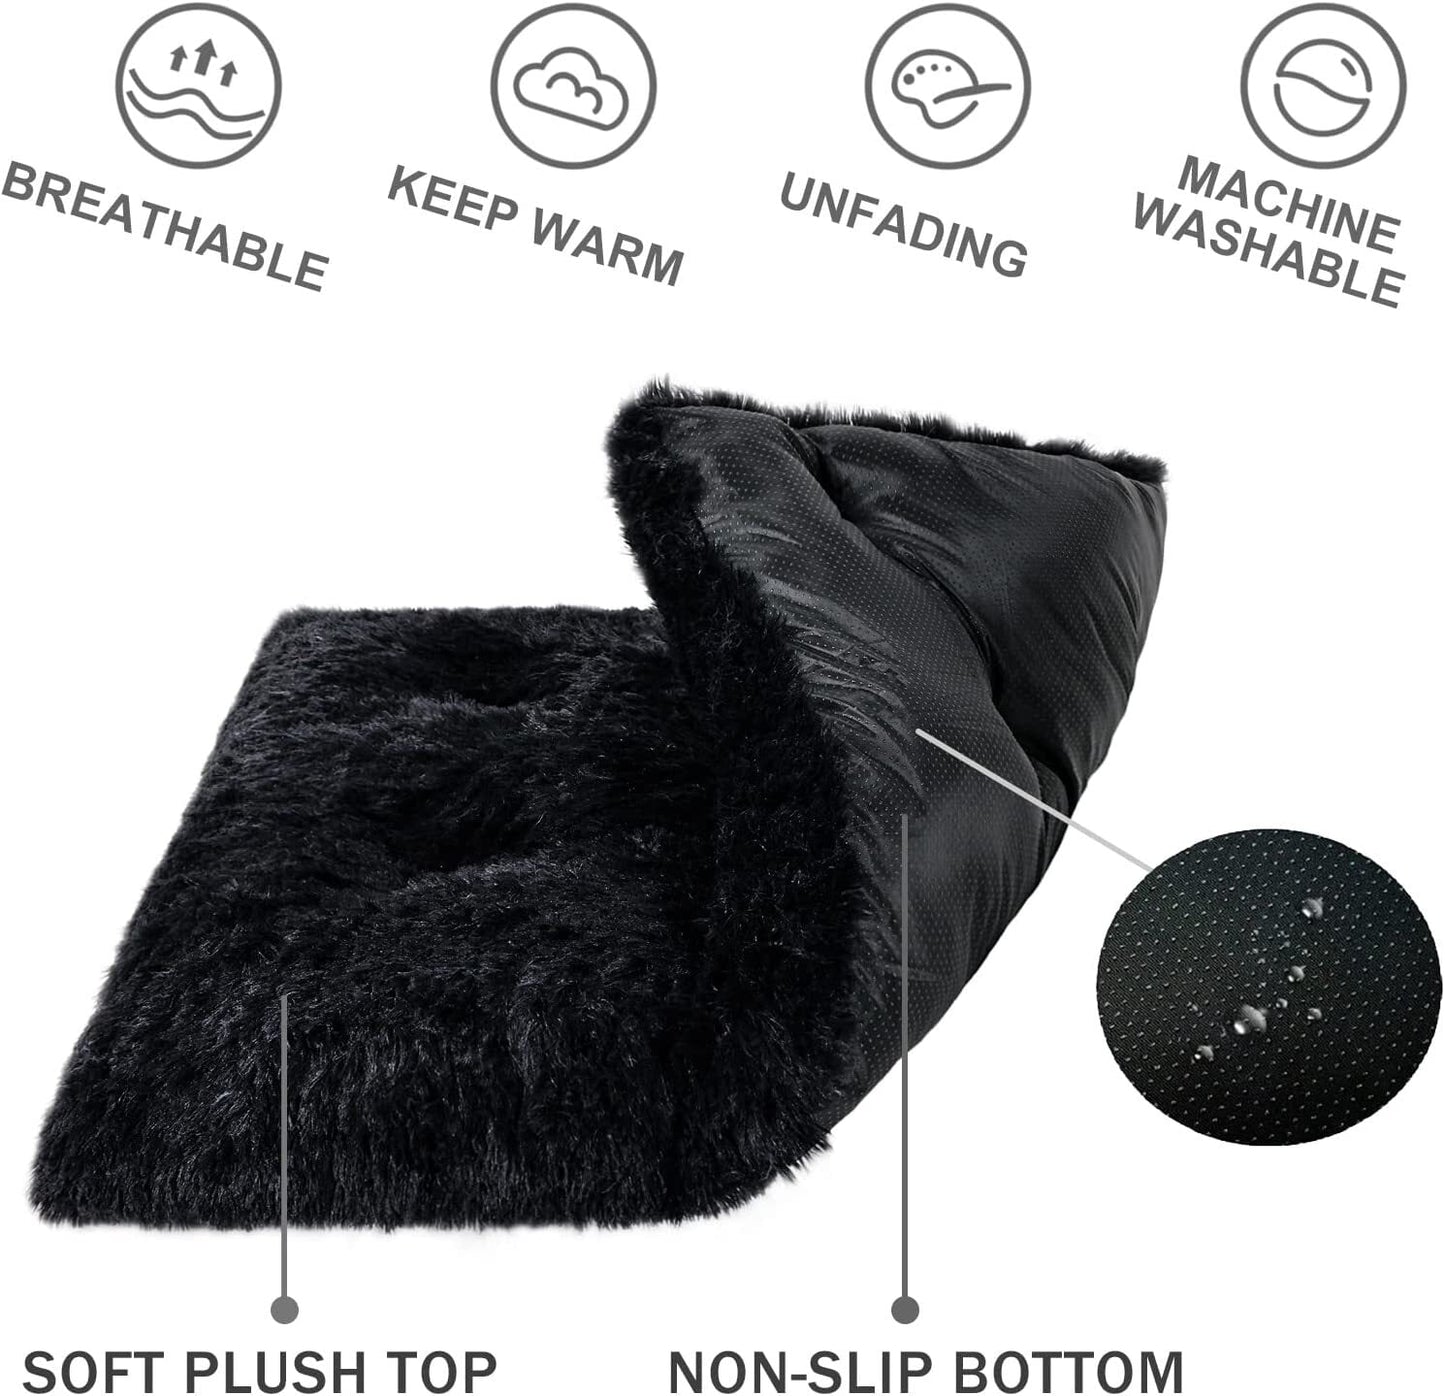 Exclusivo Mecla Soft Plush Dog Bed Crate Mat for Small Dogs (26*20*4 in), Faux Fur Fluffy Dog Pet Cat Kennel Pad with Anti-Slip Bottom, Machine Washable Black